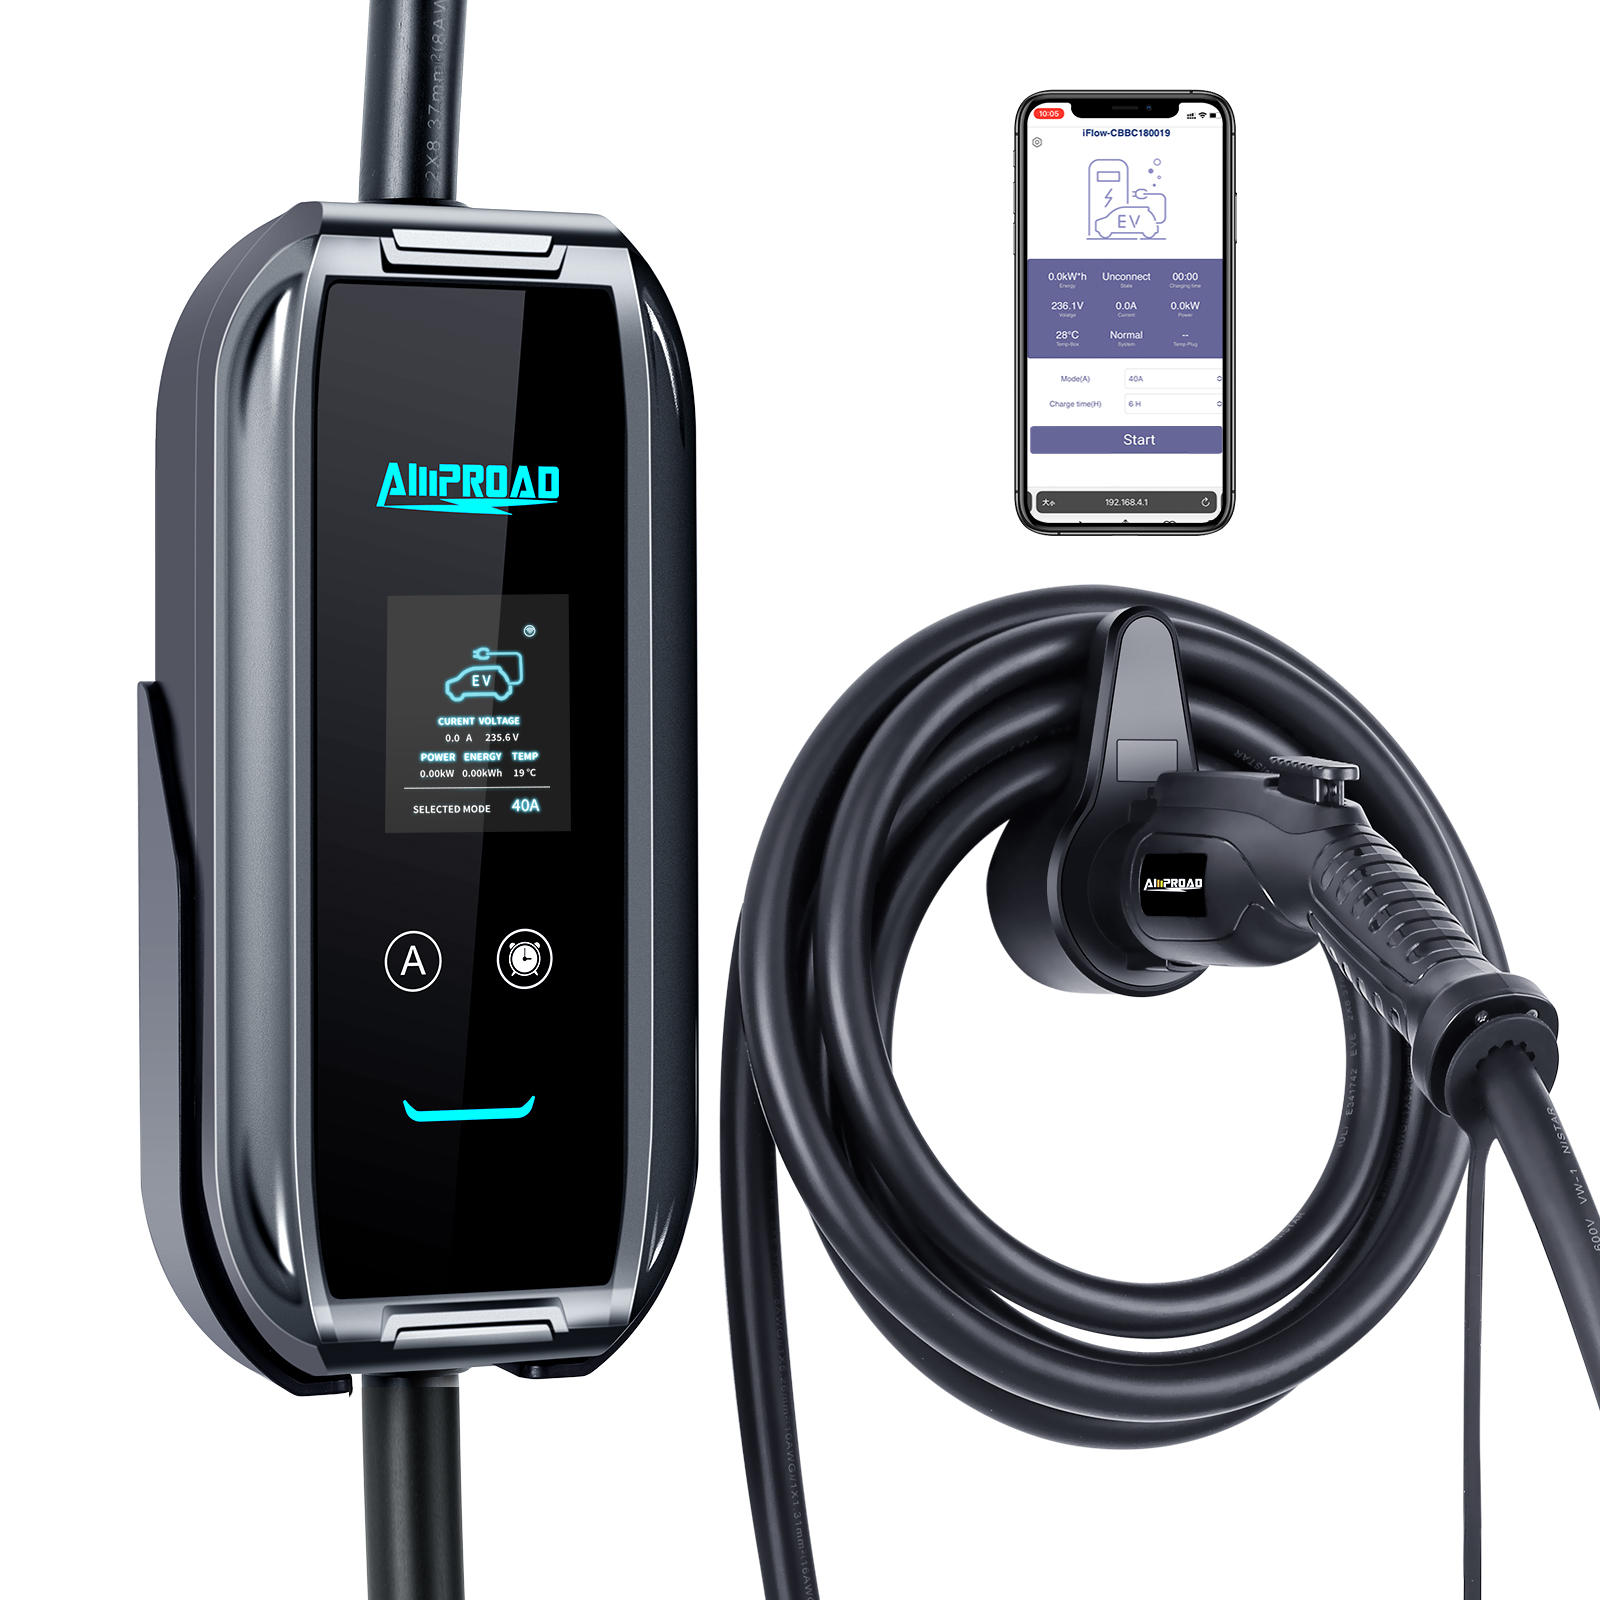 EV home charger